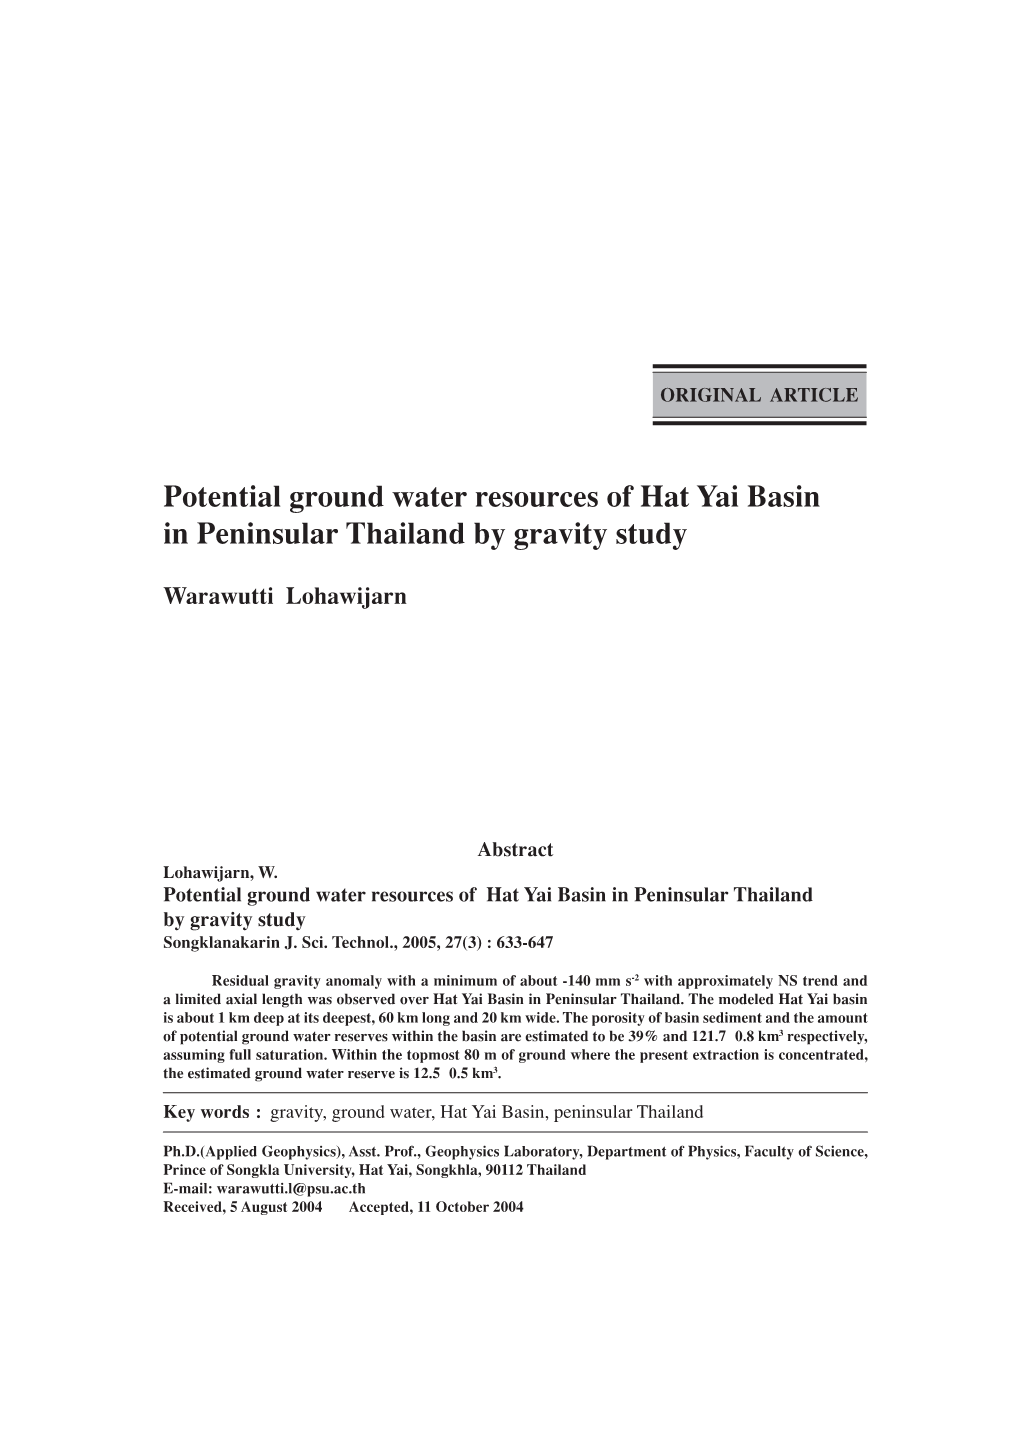 Potential Ground Water Resources of Hat Yai Basin in Peninsular Thailand by Gravity Study